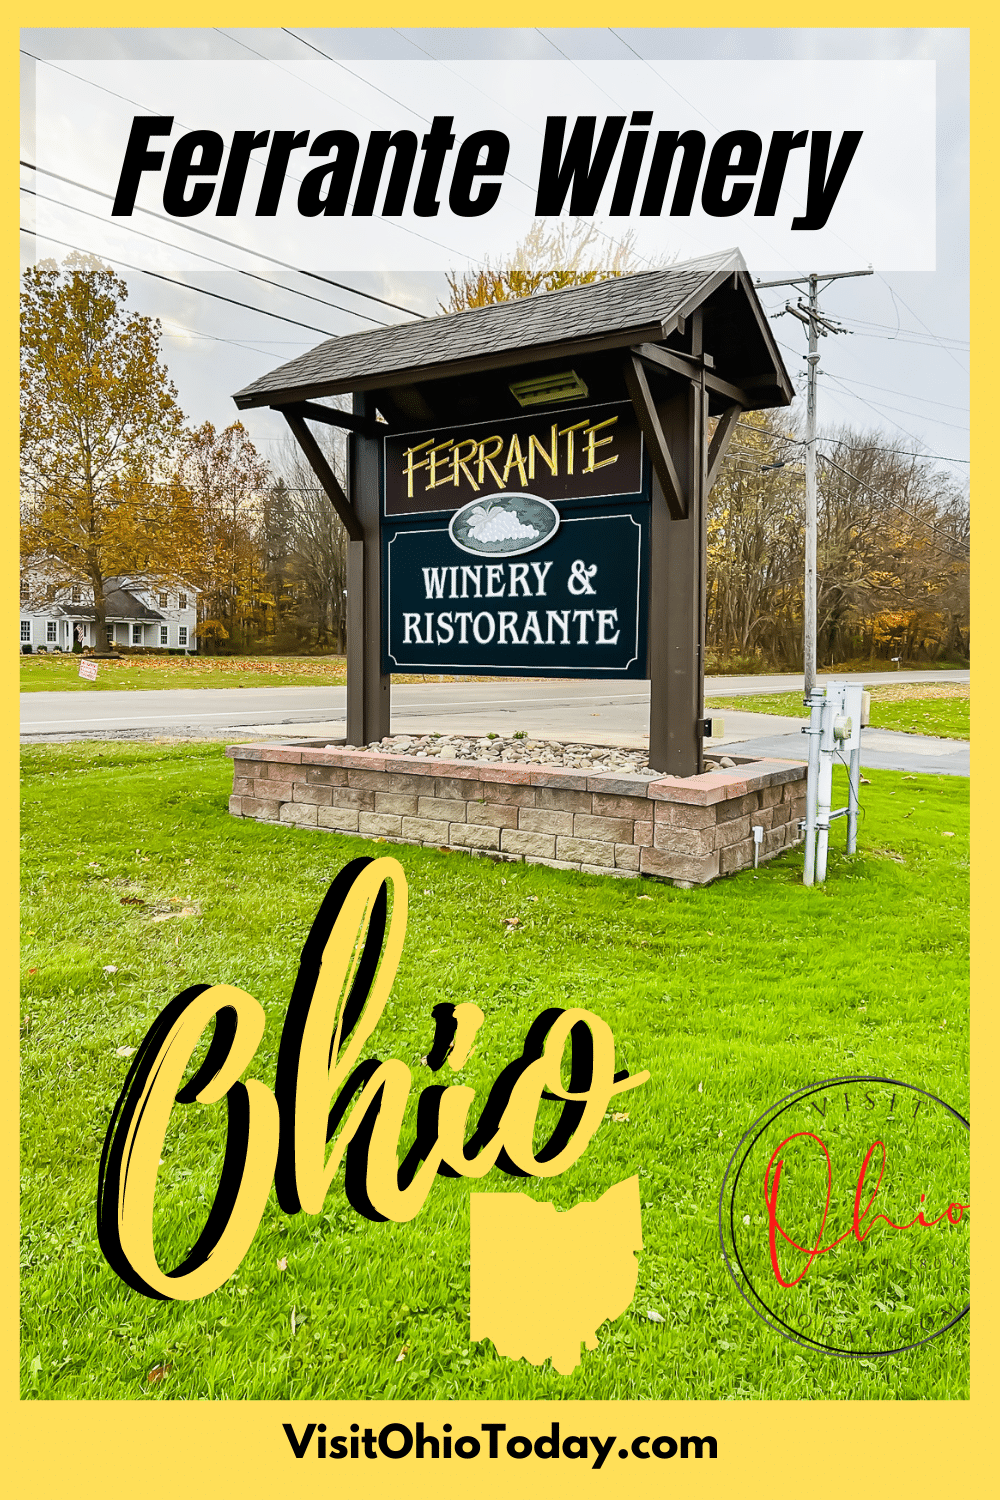 Ferrante Winery is an Ohio Winery located in Geneva, Ohio. The Ferrante Family has been producing award winning wines since 1937. #ferrantewinery #ohiowines #ohiowinery